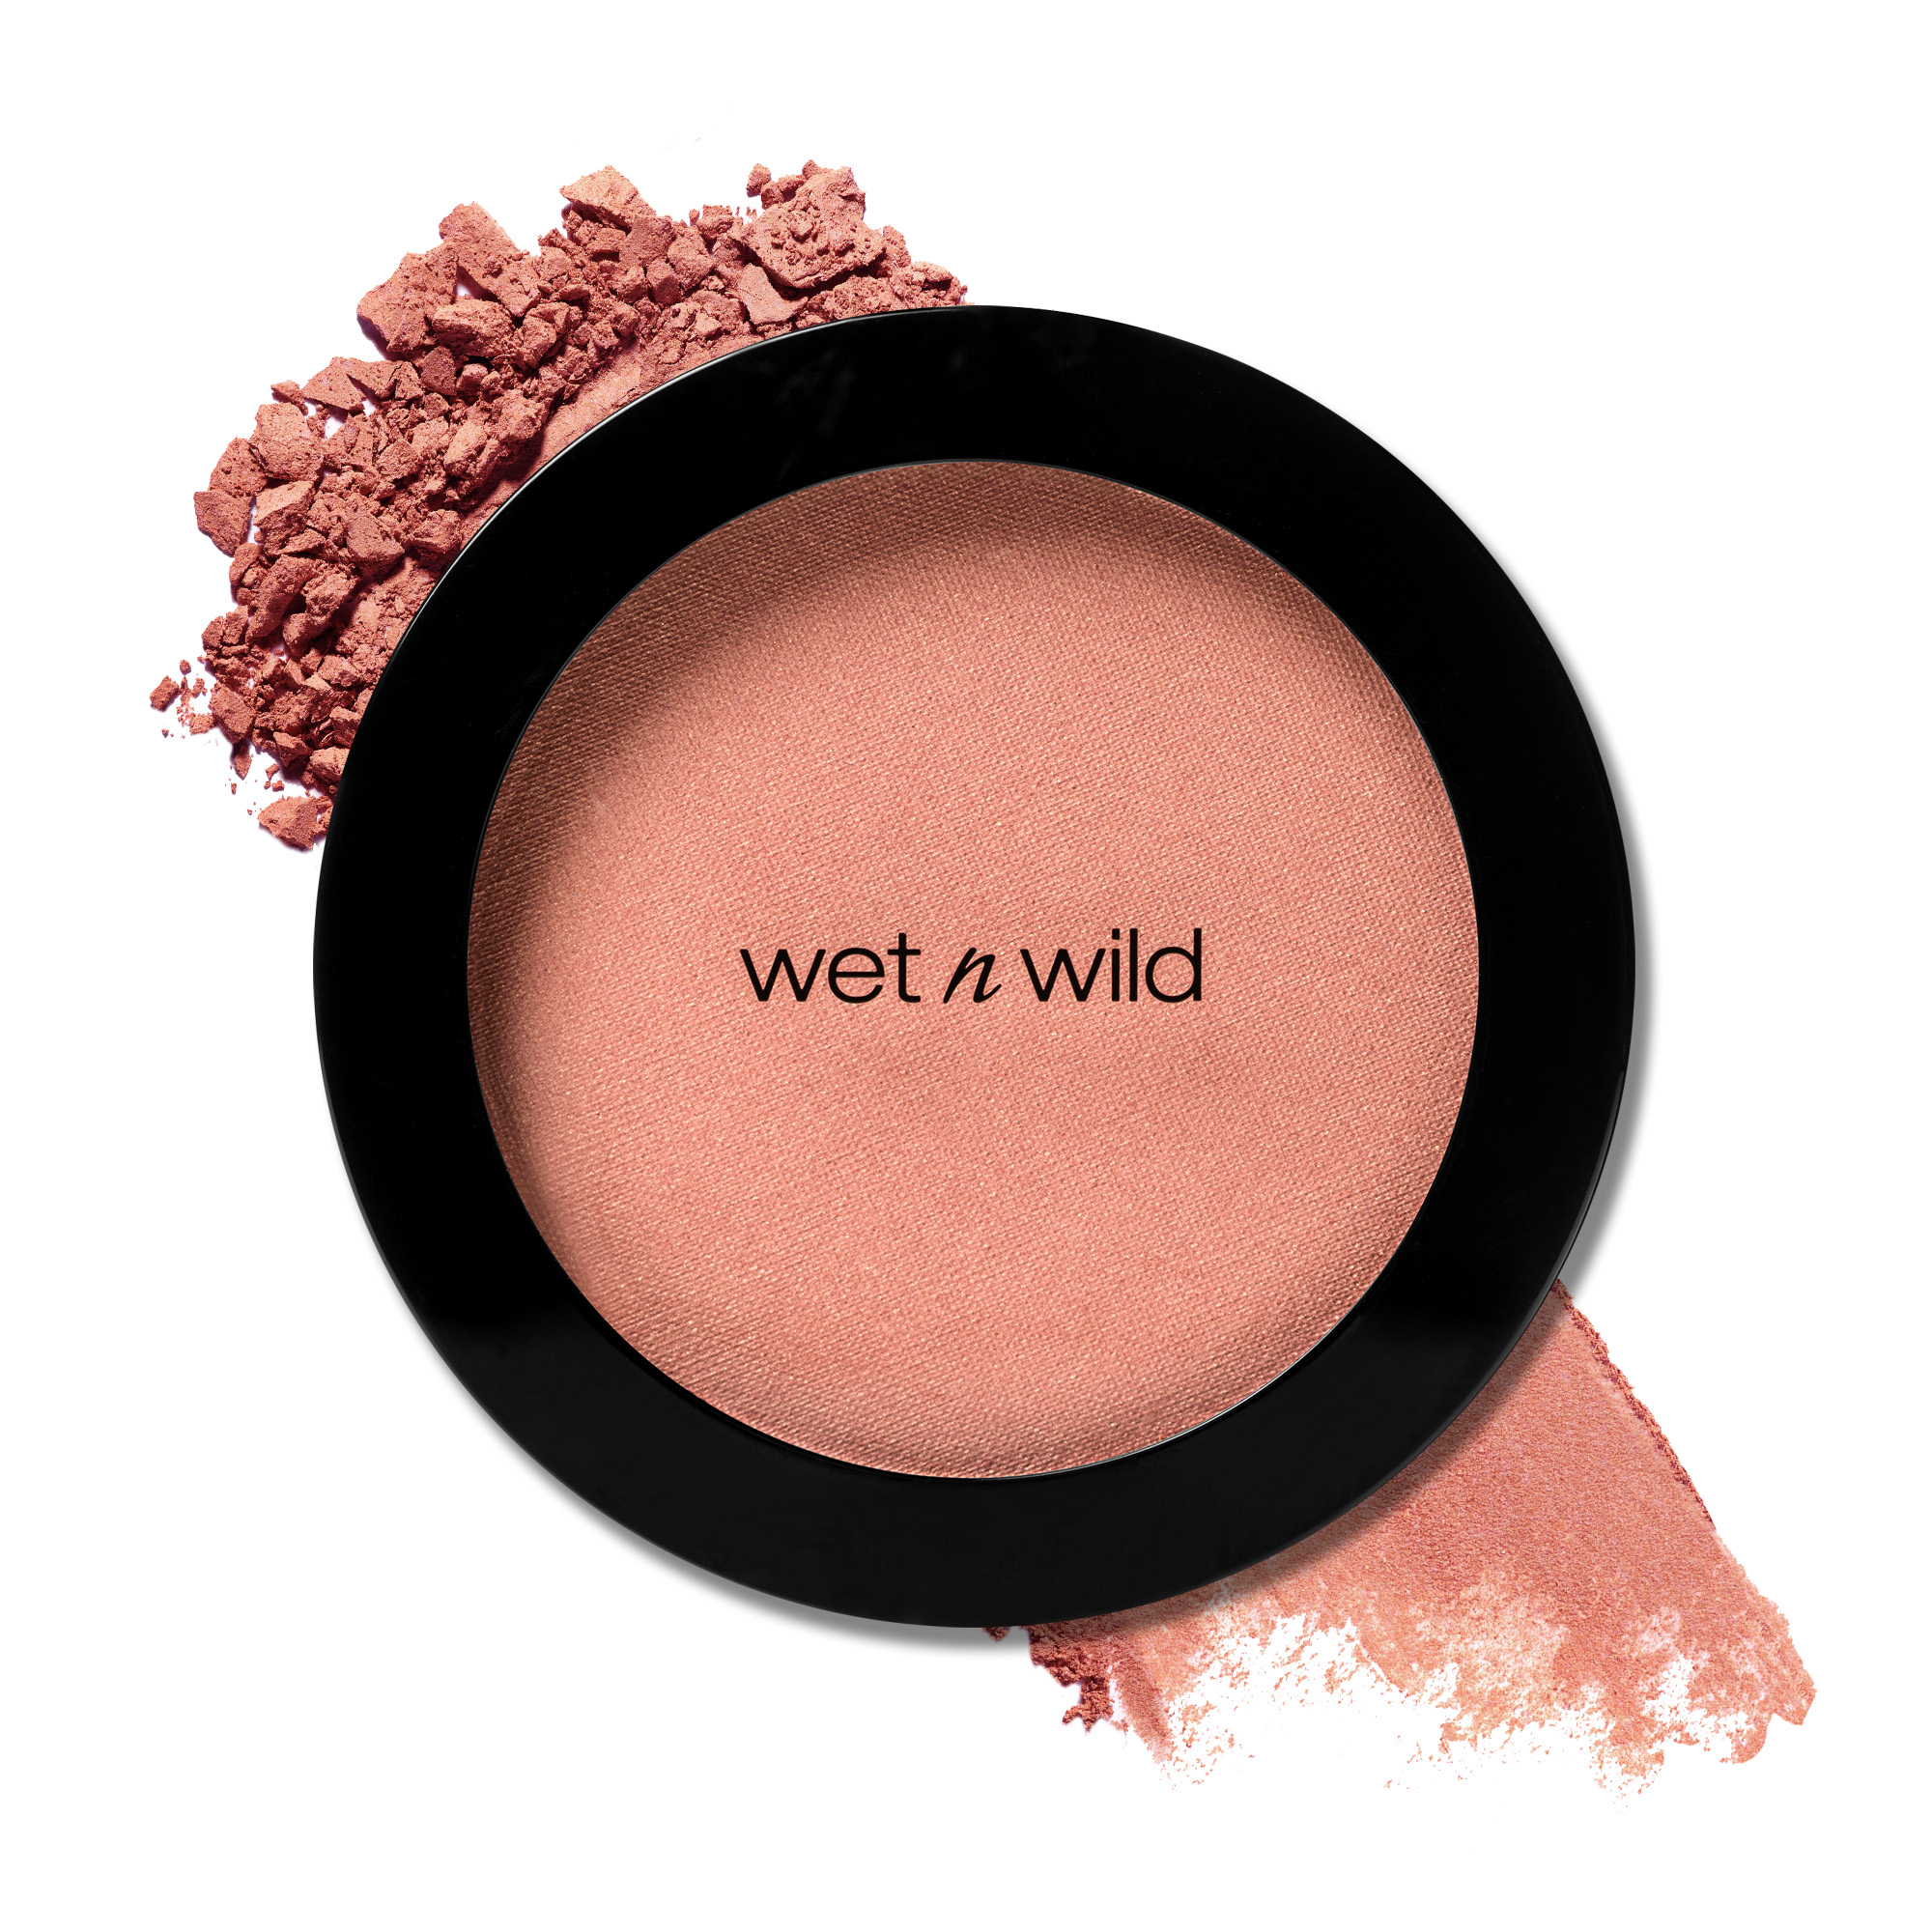 What is the color of Soft Blush?